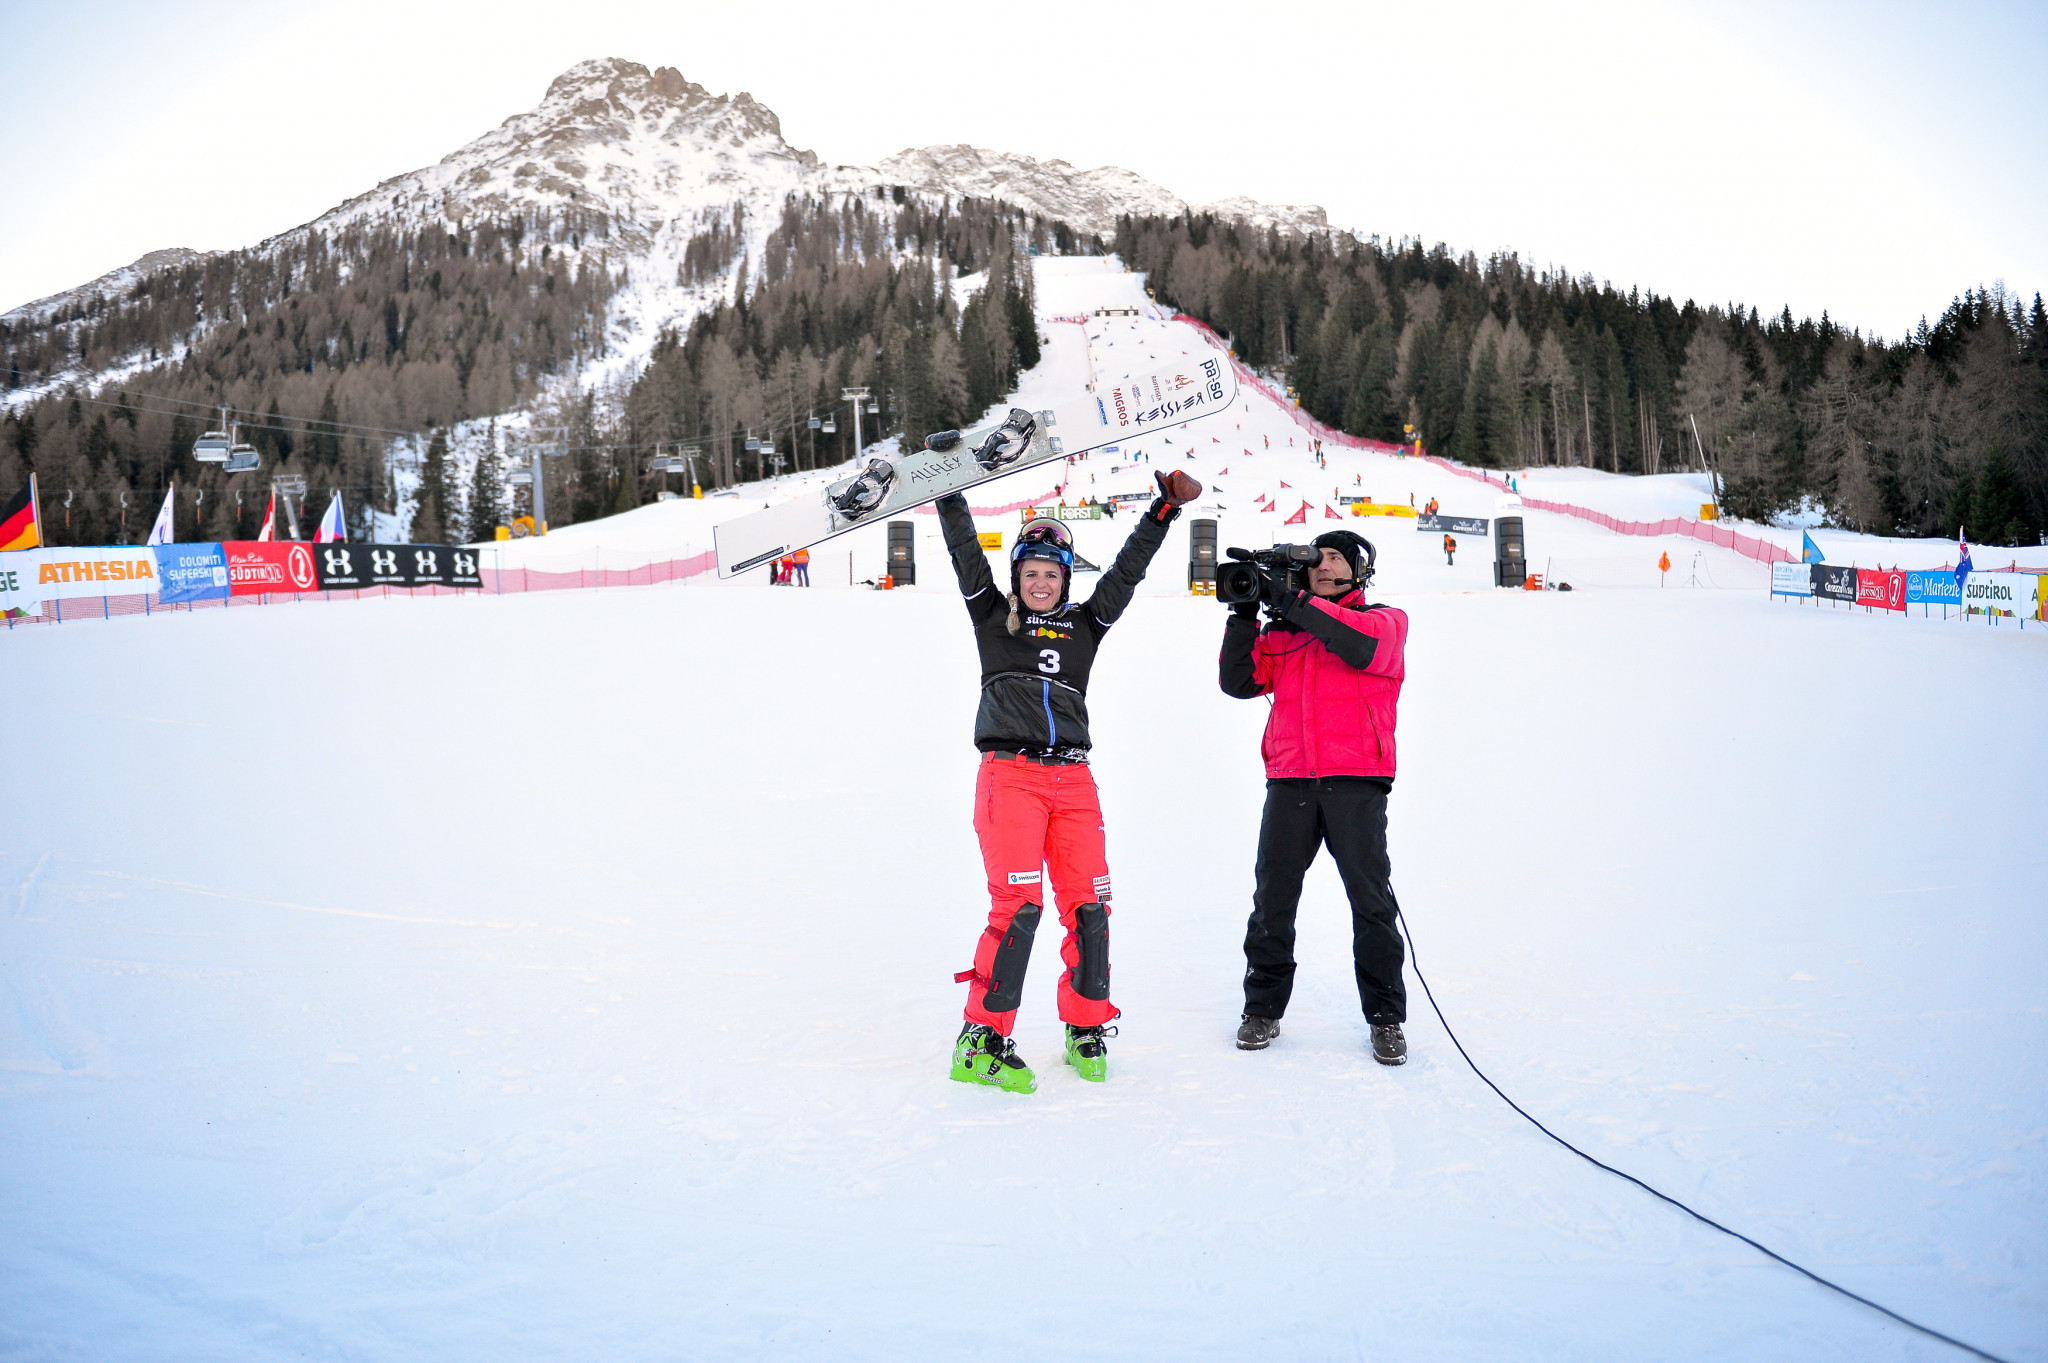 Carezza going green ahead of FIS Snowboard Alpine World Cup opener